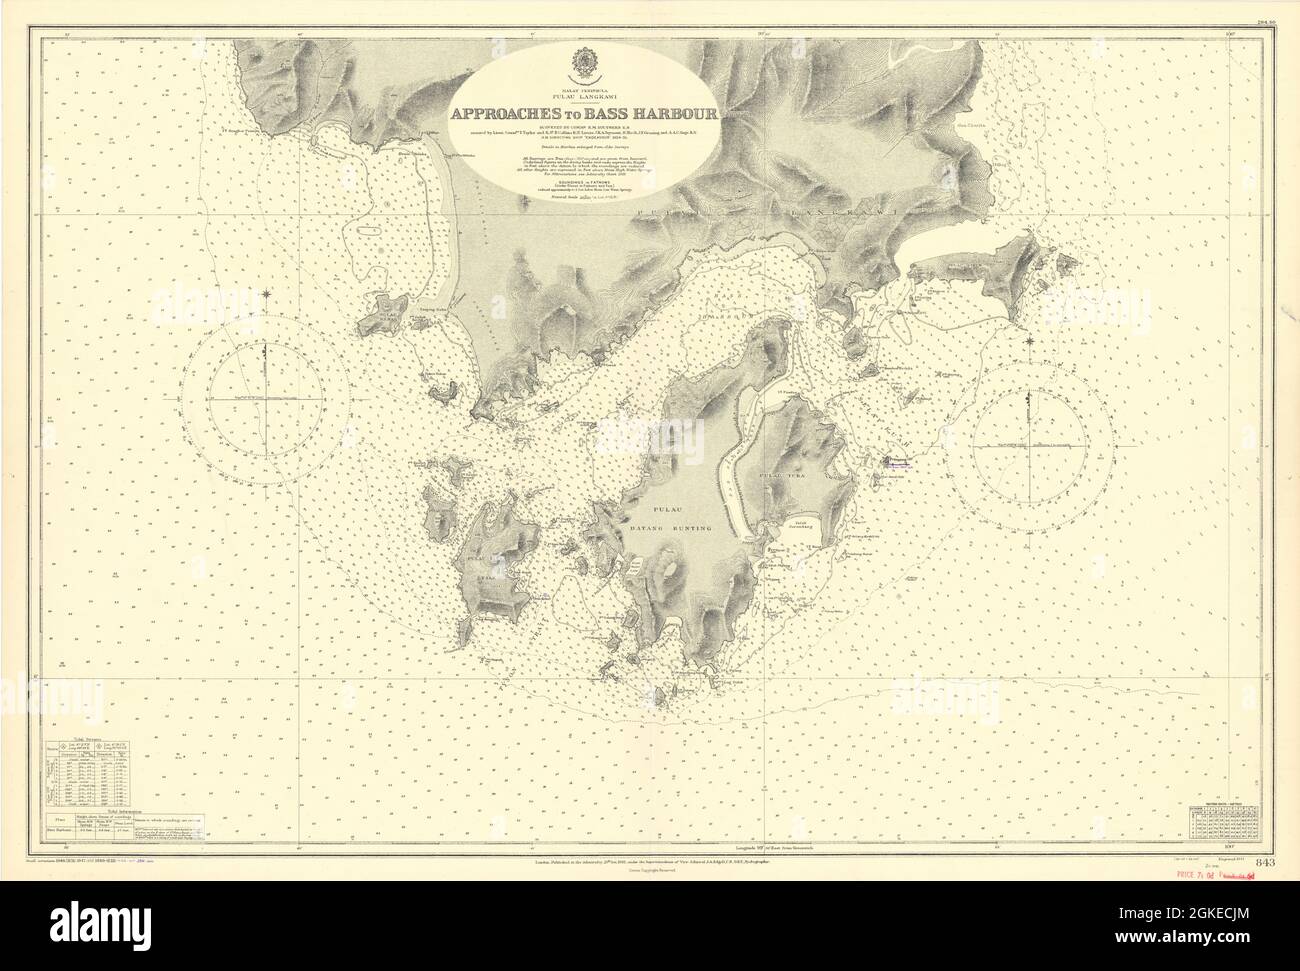 Pulau Langkawi Bass Harbour approaches Malaysia ADMIRALTY chart 1941 (1956) map Stock Photo